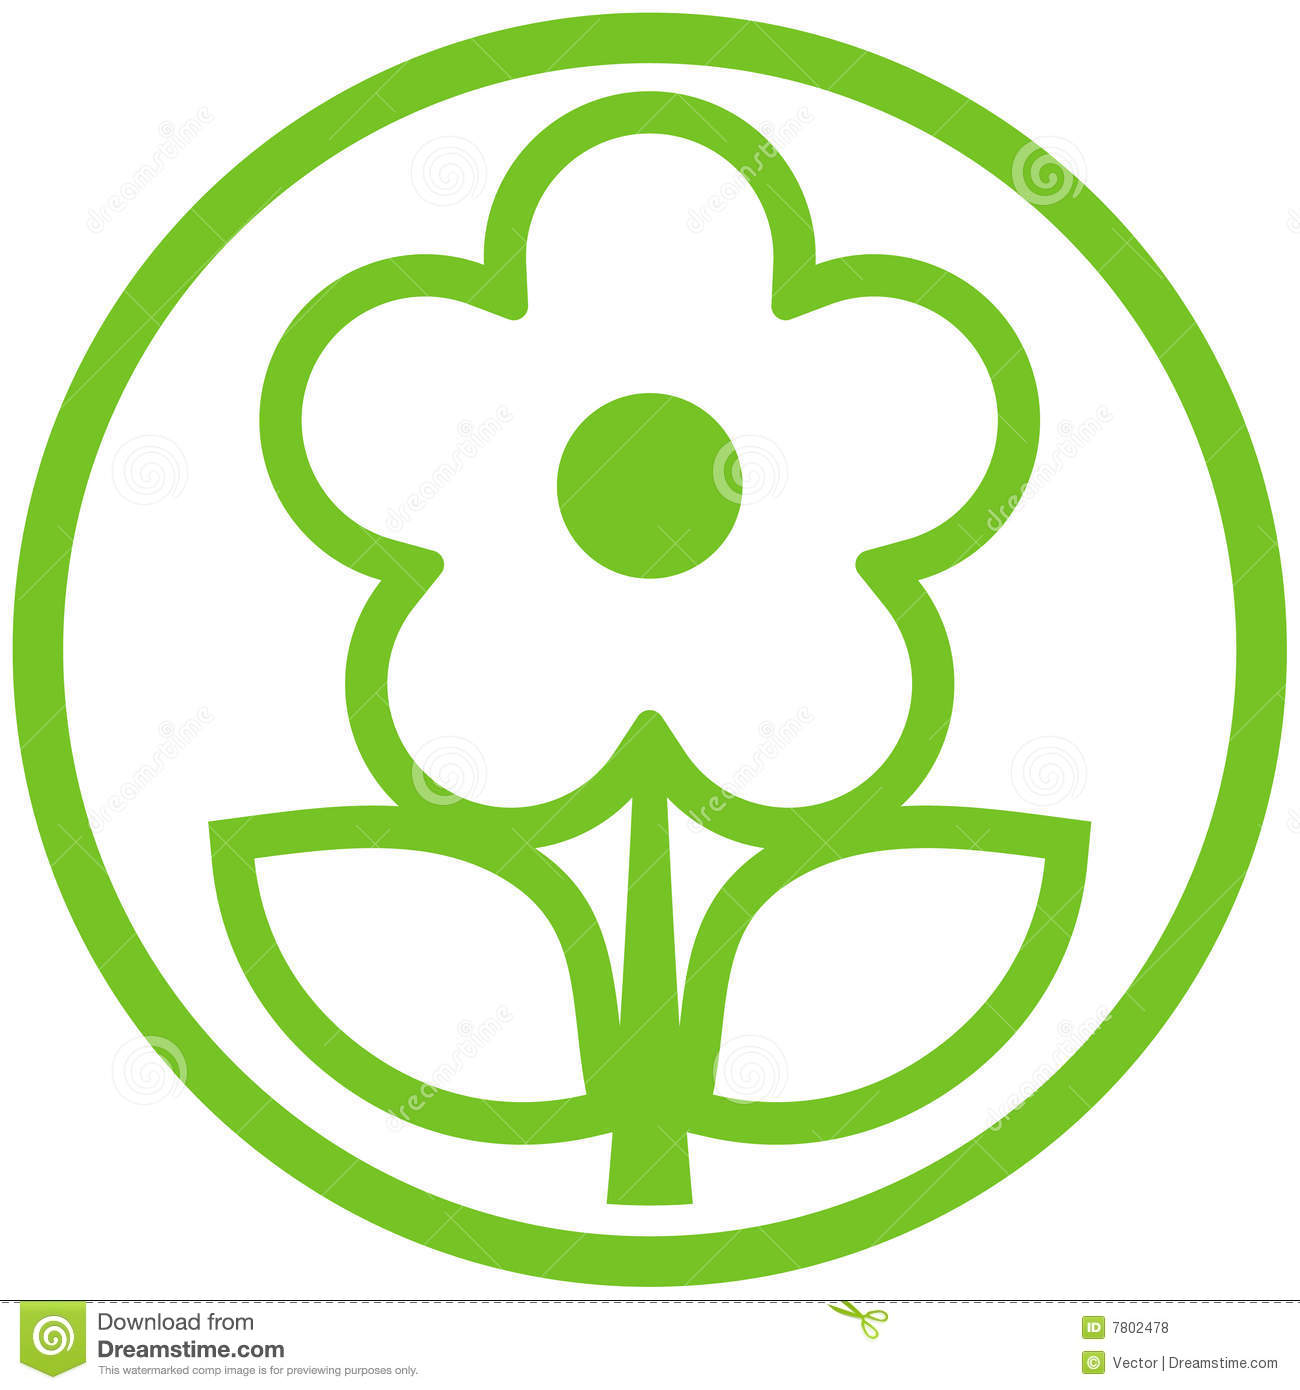 Flower Icon Vector Free